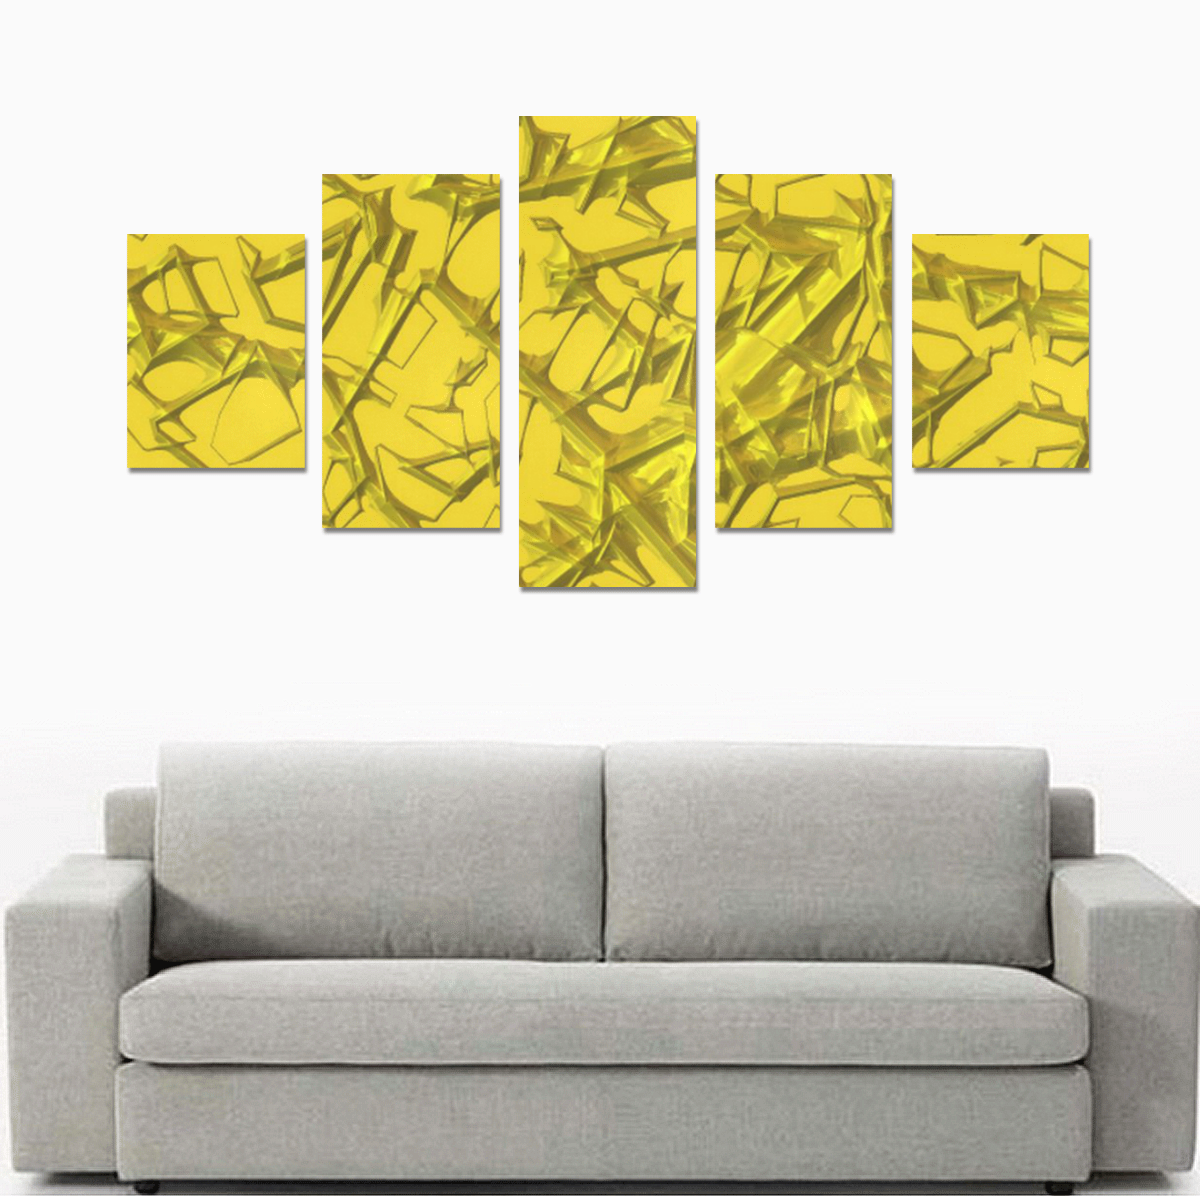 Thorny abstract,golden Canvas Print Sets B (No Frame)